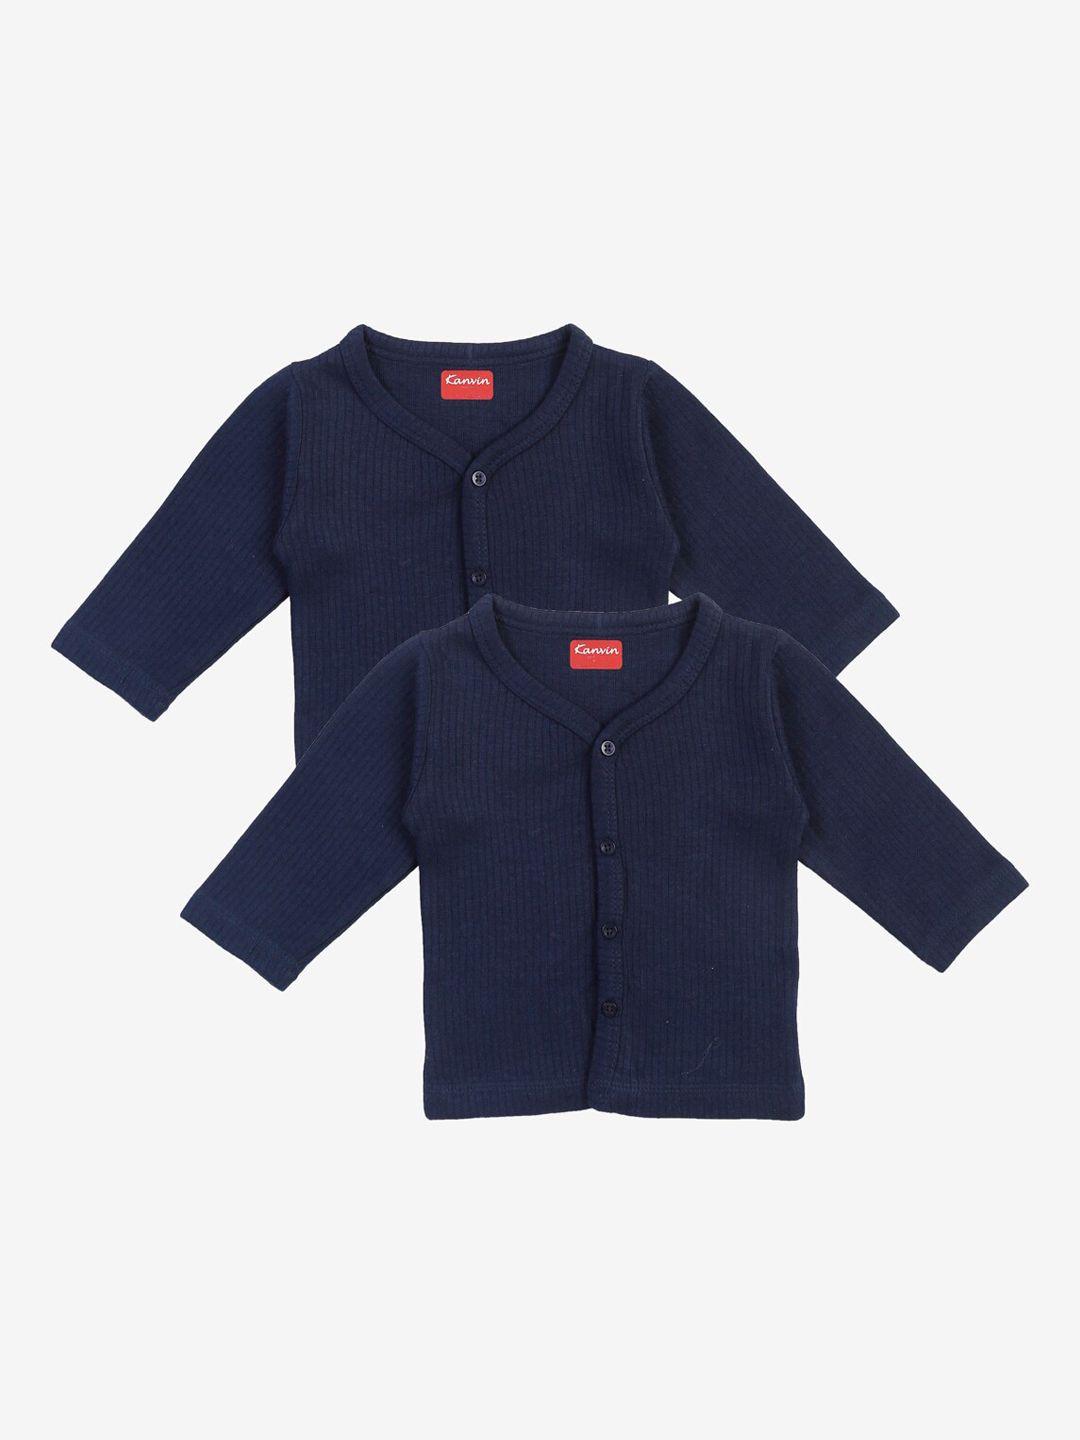 kanvin boys navy blue set of 2 solid thermal tops